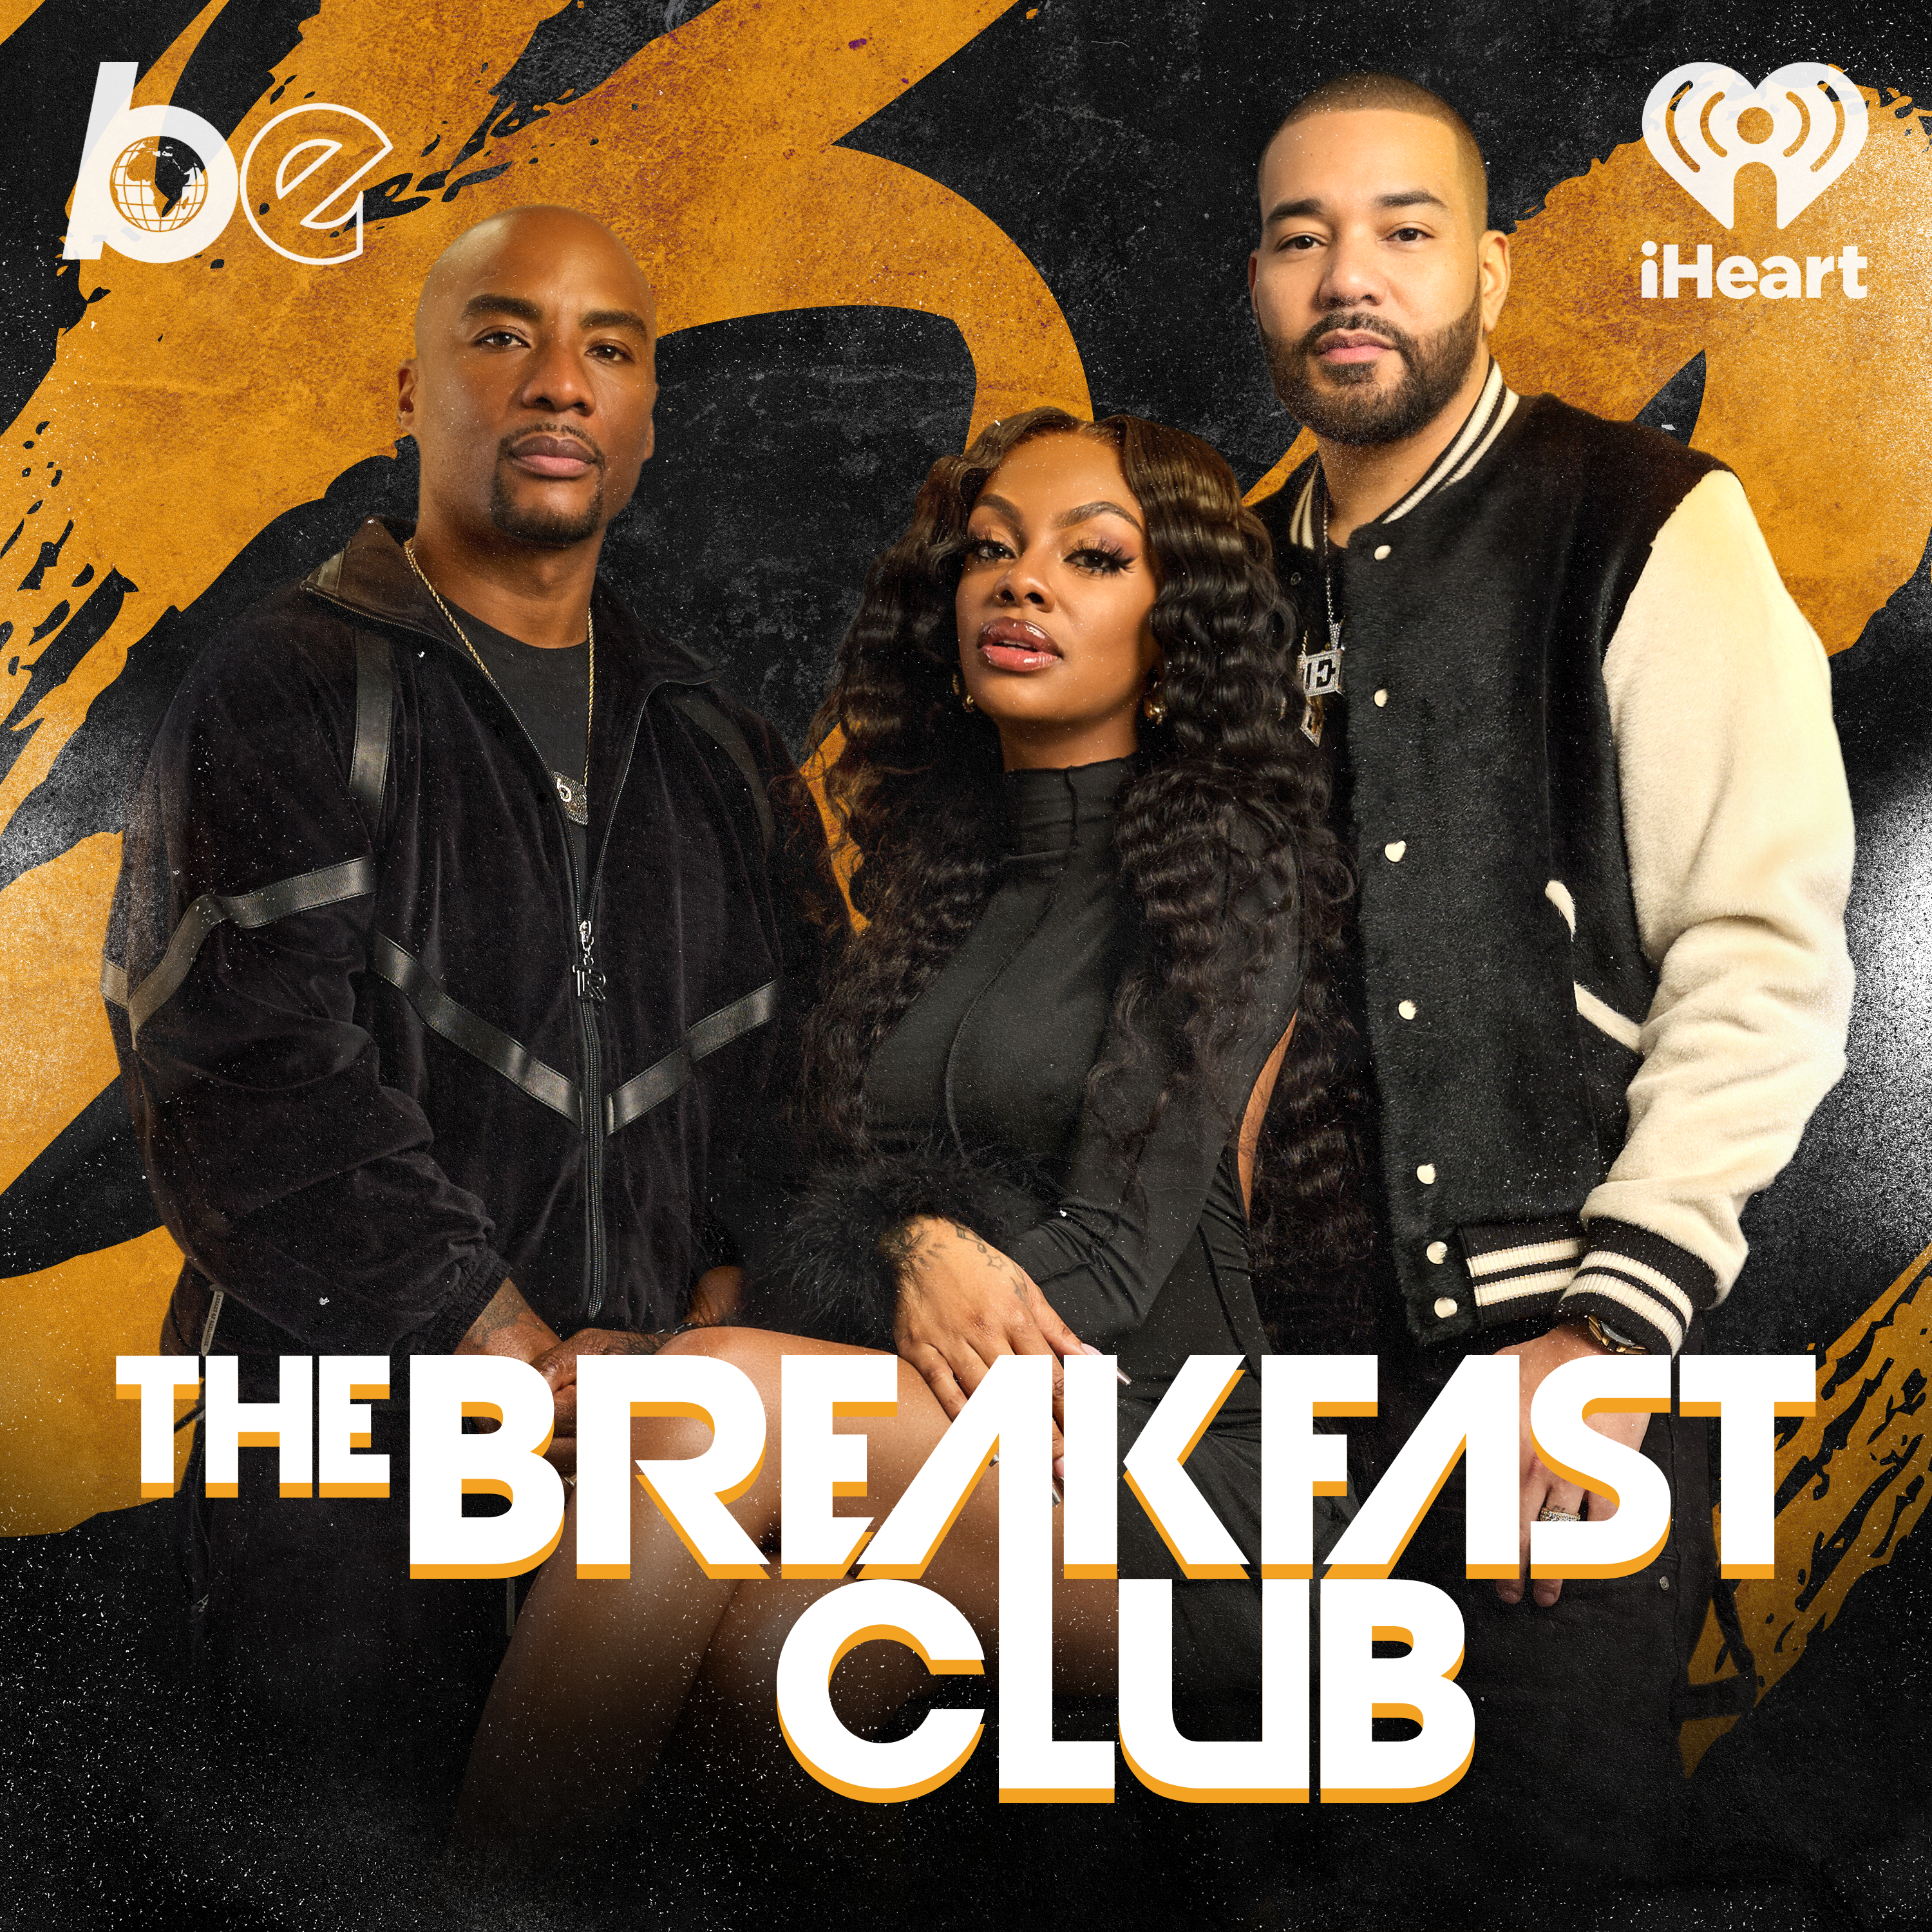 FULL SHOW: Stevie J Wants To Fight 50 Cent, Daphne Joy Accuses 50 Cent Of 'Raping' & 'Physically Abusing' Her, DJ Nyla Symone Talks New Tyla Album, New Music From Joey Bada$$, Moneybagg Yo + More